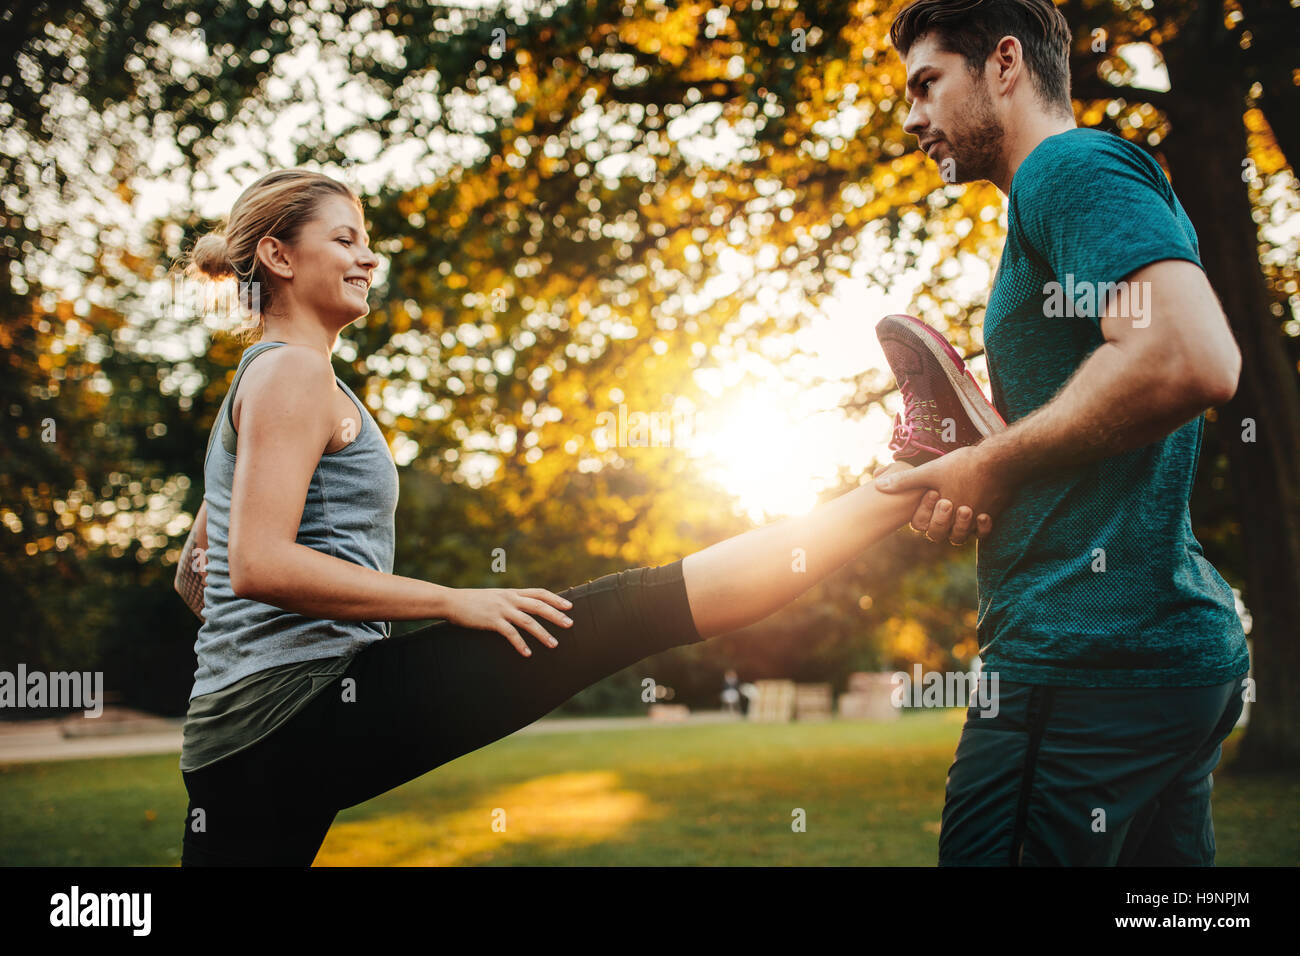 Personal trainer holding leg of woman stretching in park. Female exercising with support from her coach. Stock Photo